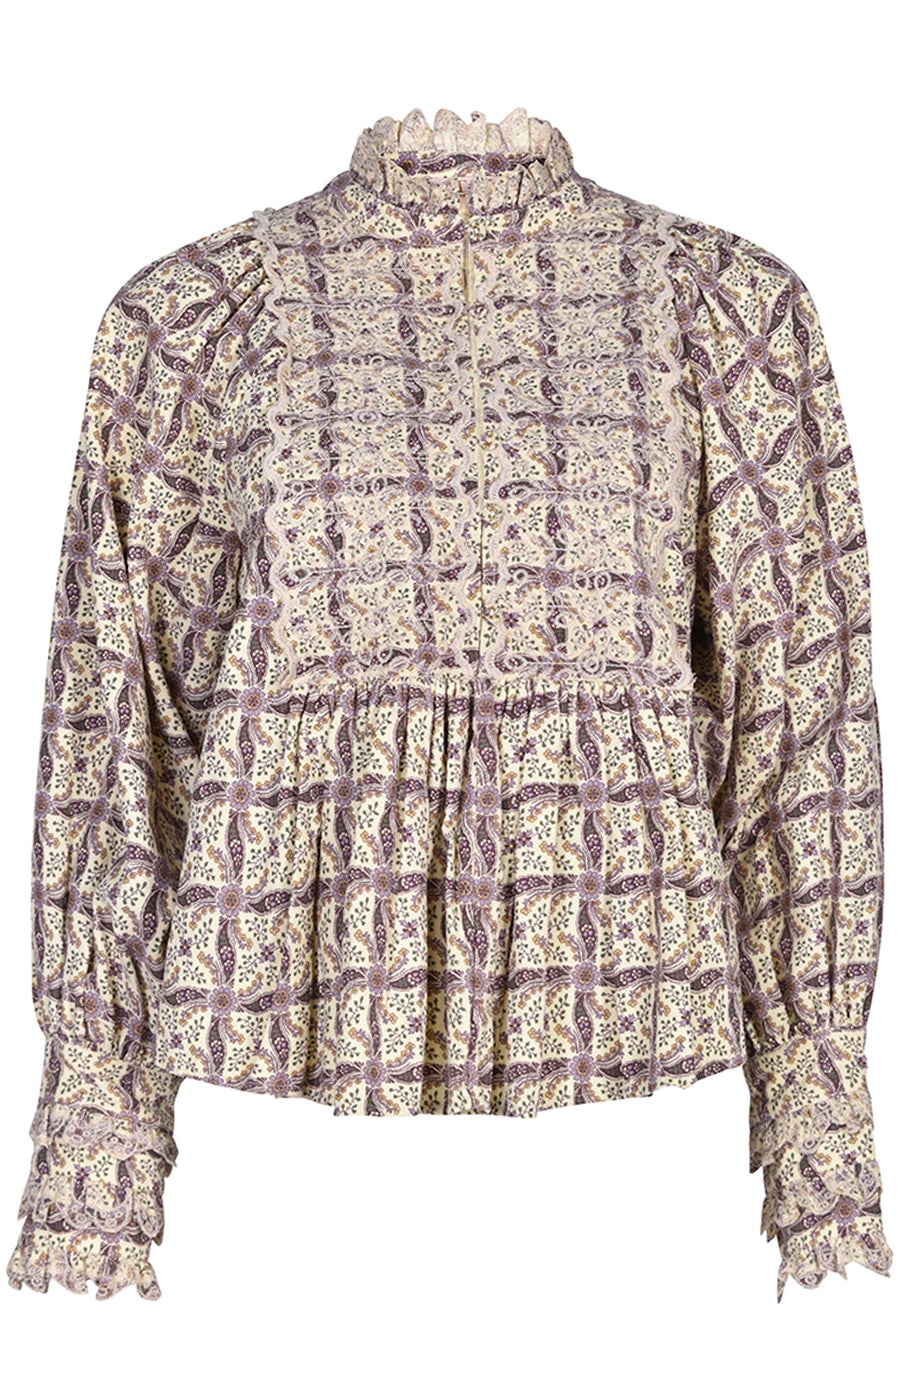 ByTimo Baby Blouse - Paisley